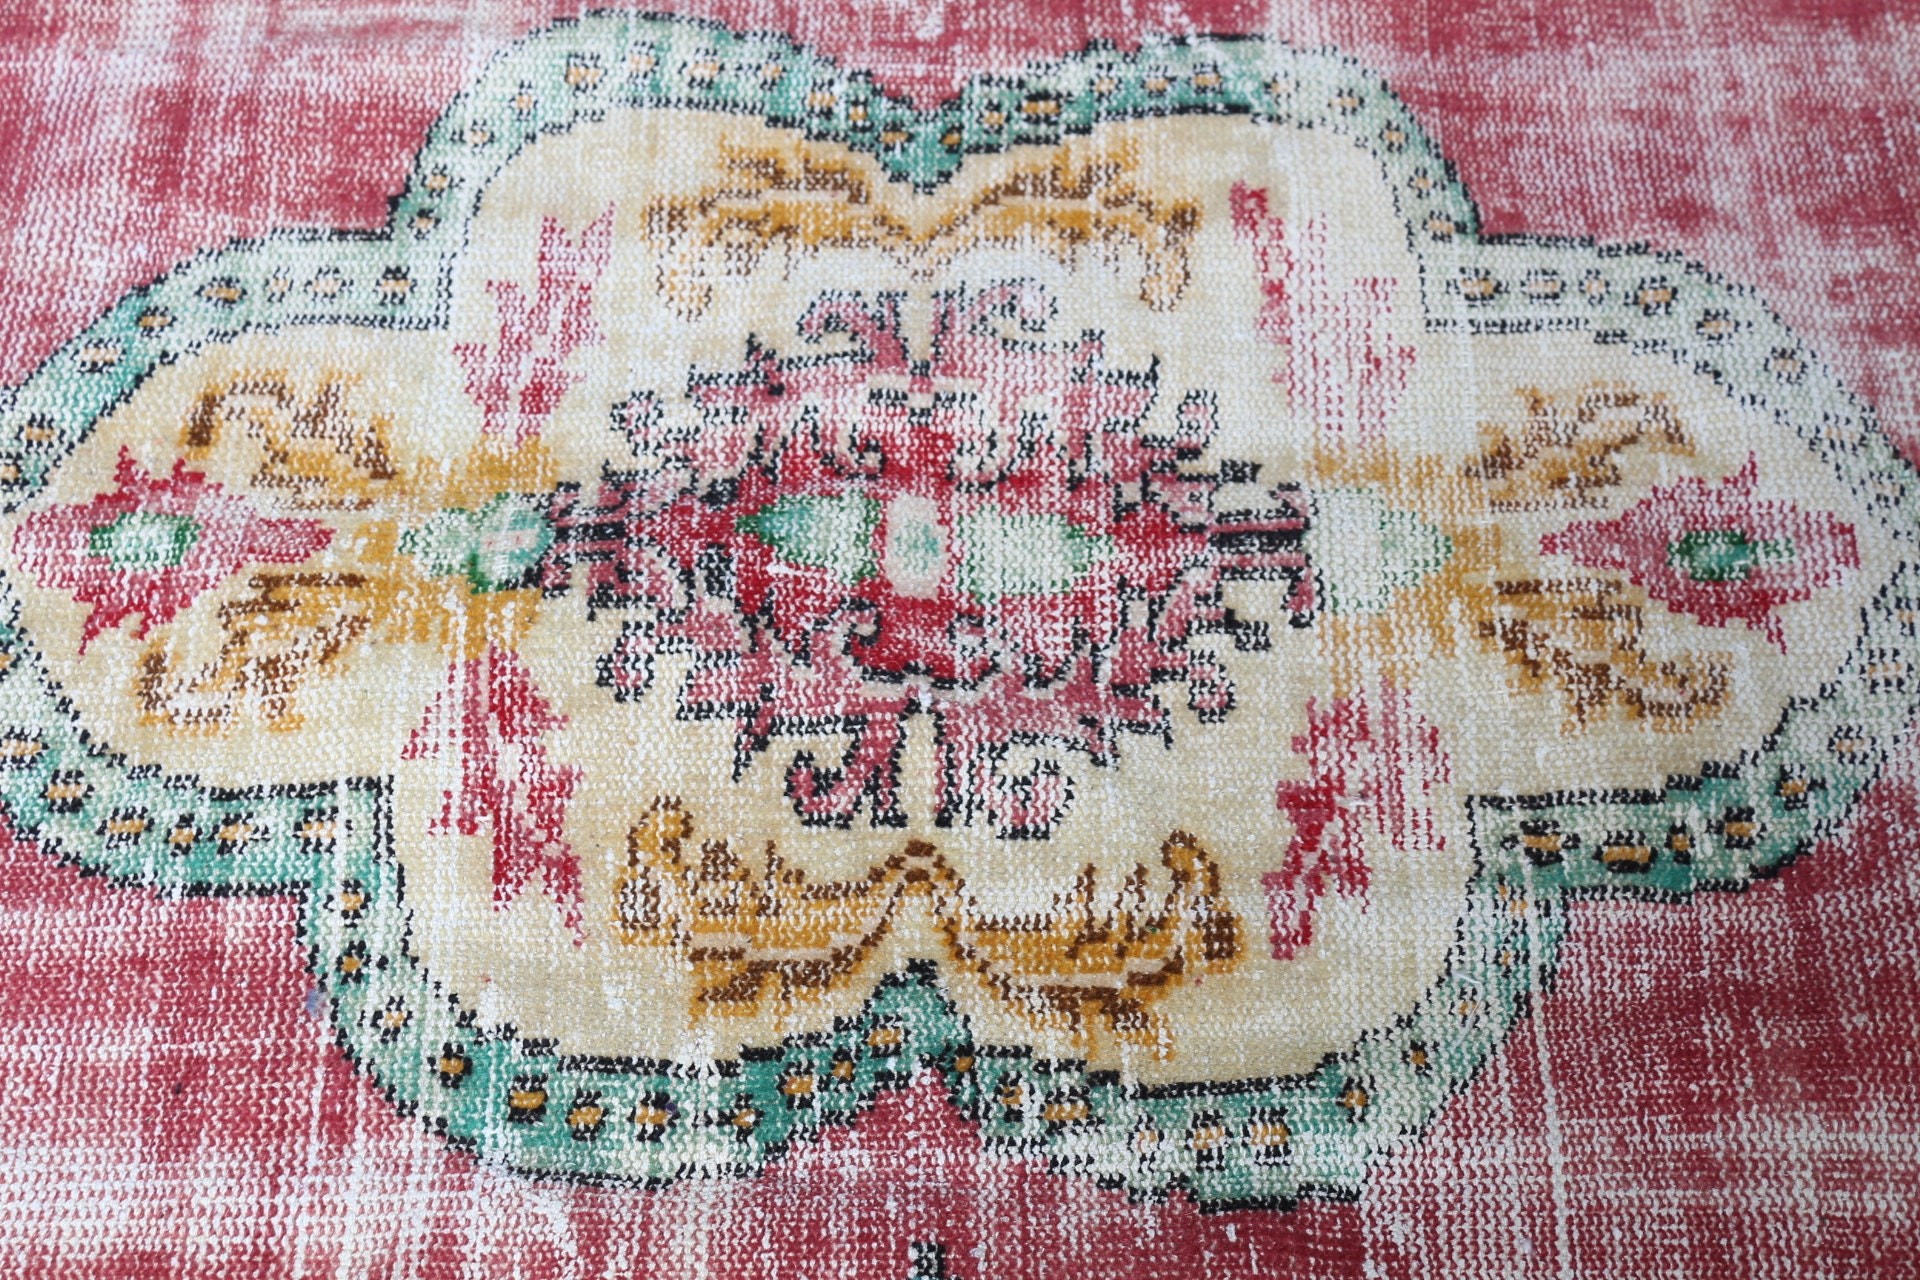 Red Antique Rugs, Kitchen Rugs, 6.8x11.3 ft Oversize Rugs, Tribal Rug, Salon Rugs, Oushak Rug, Dining Room Rug, Vintage Rugs, Turkish Rugs